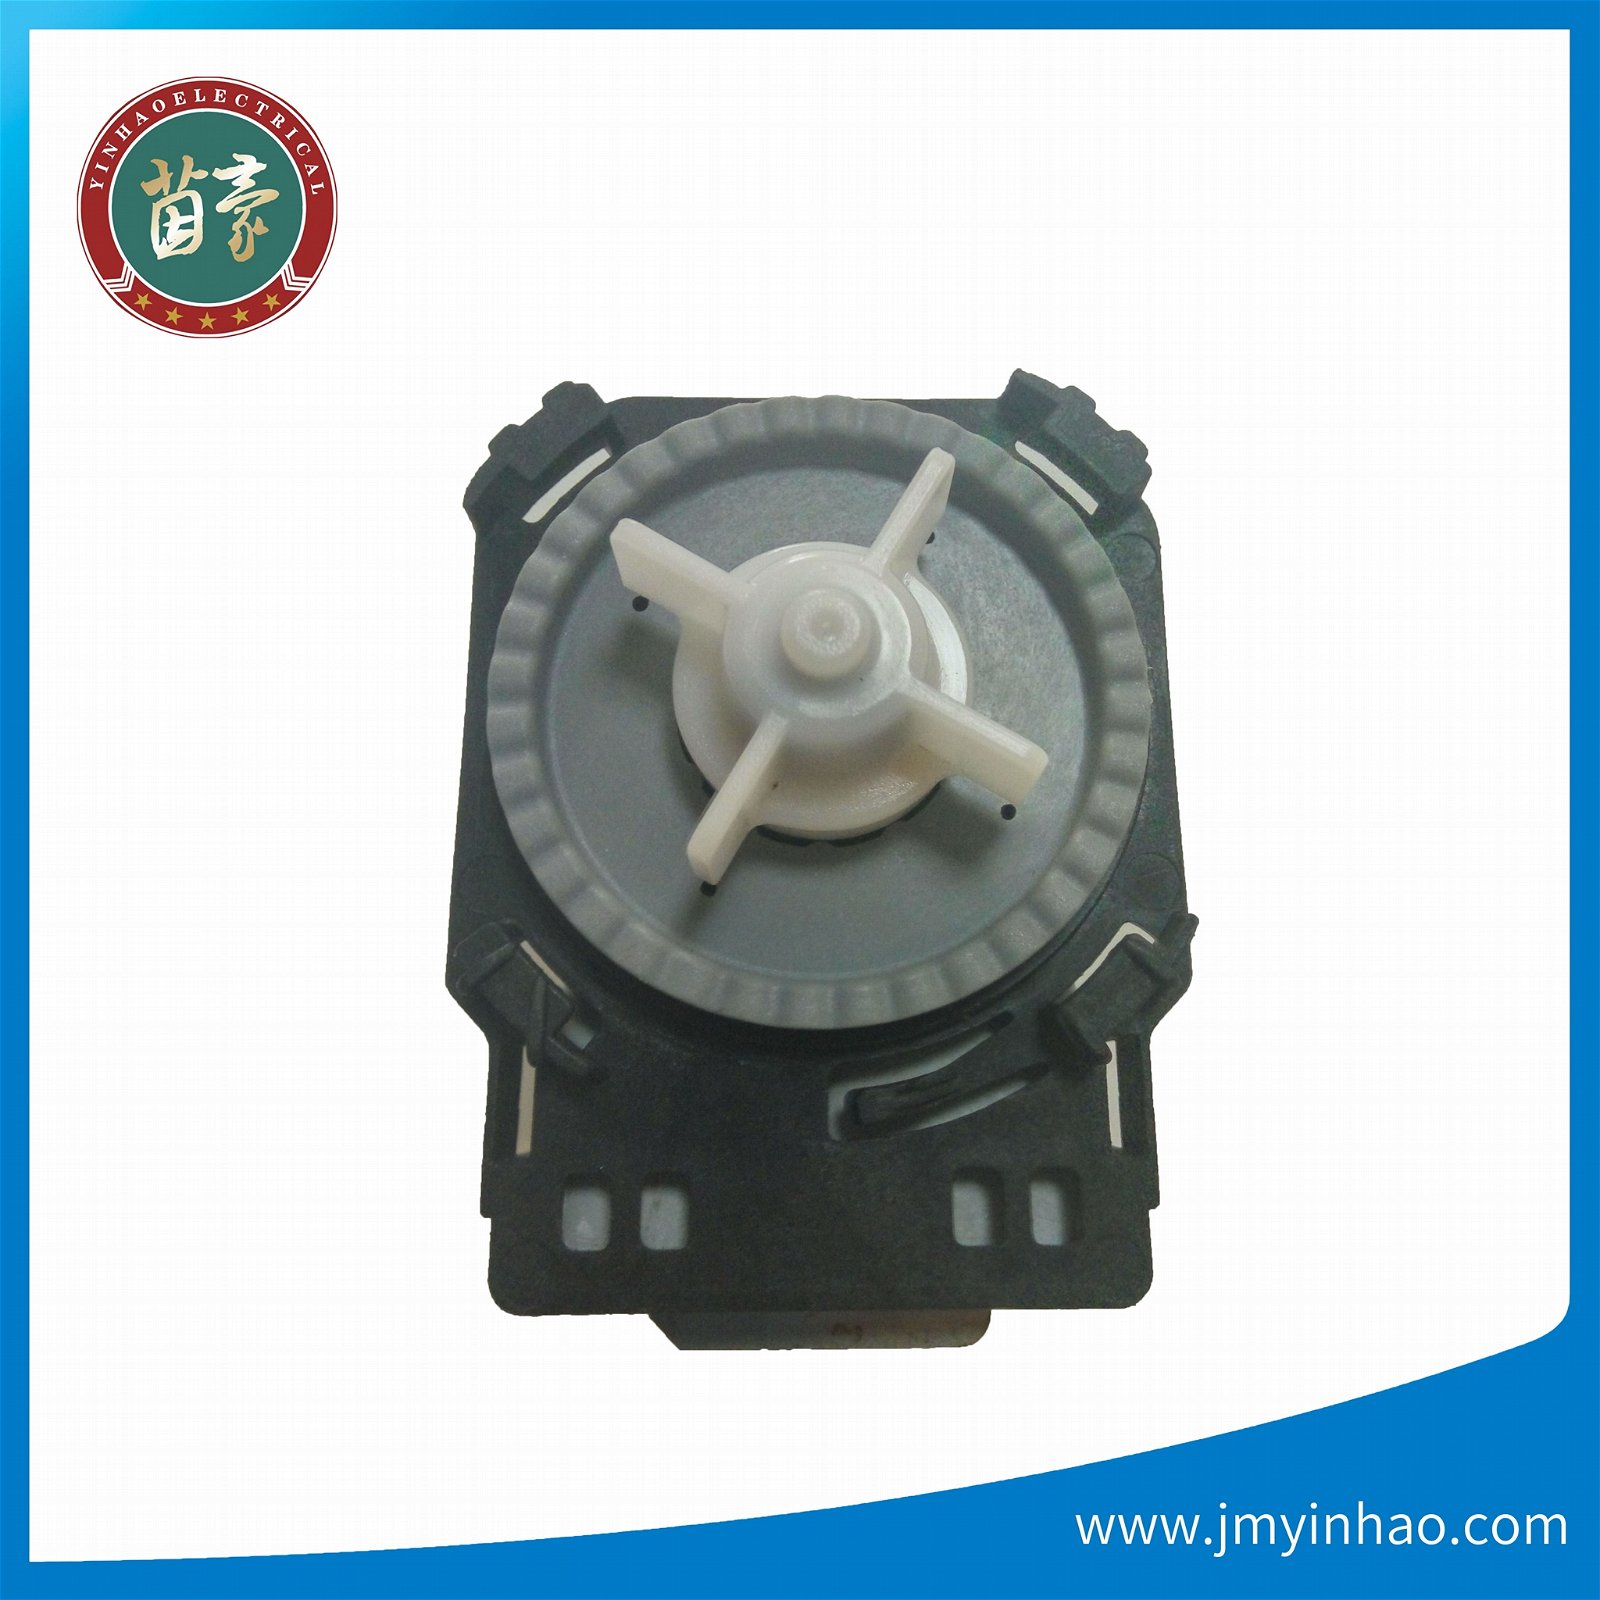 220V drain pump for fruit and vegetable washer 3